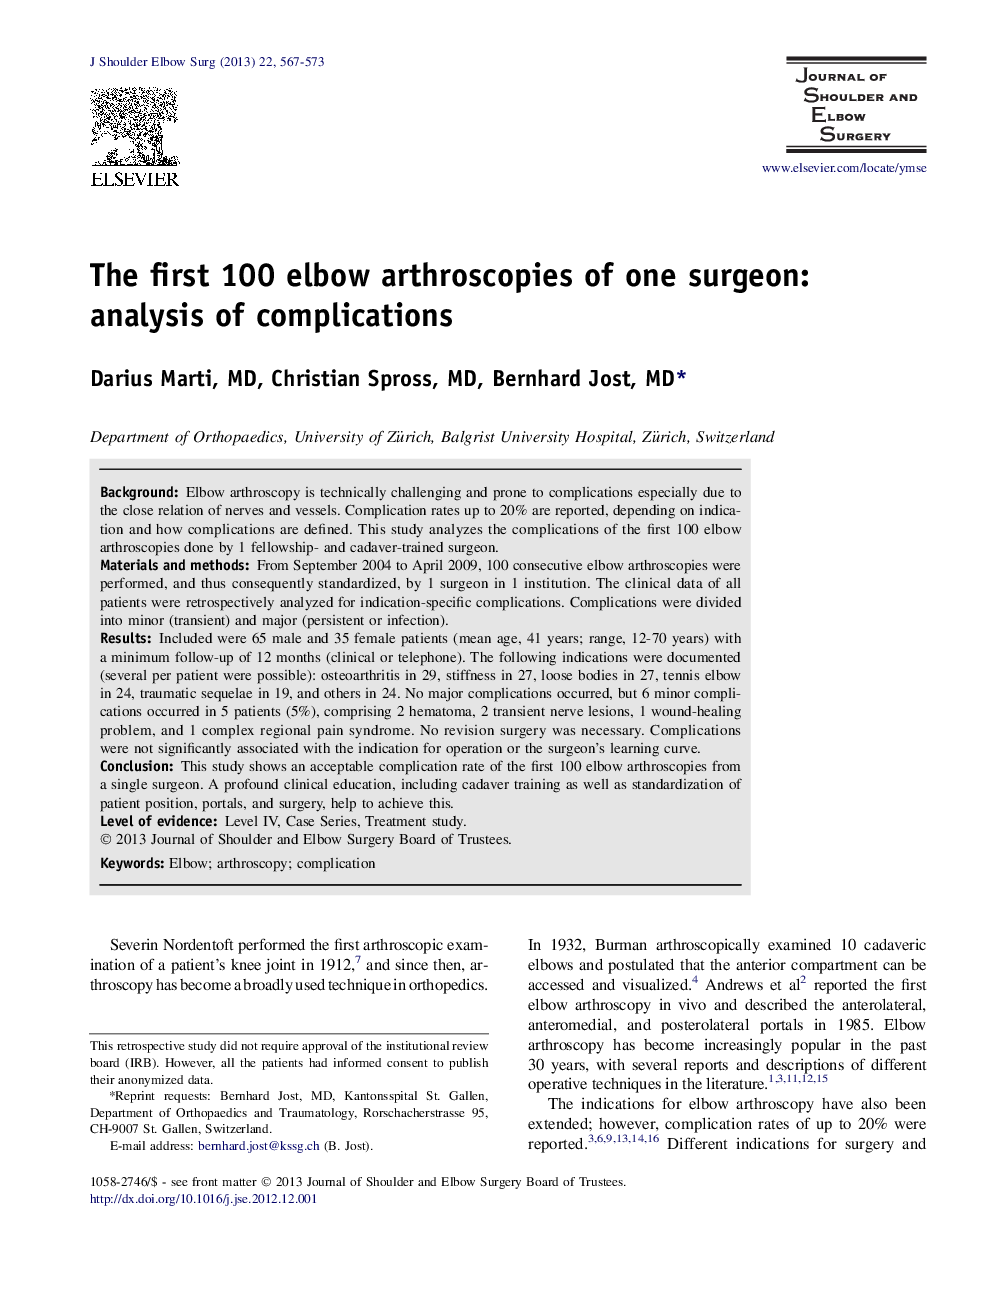 The first 100 elbow arthroscopies of one surgeon: analysis of complications 